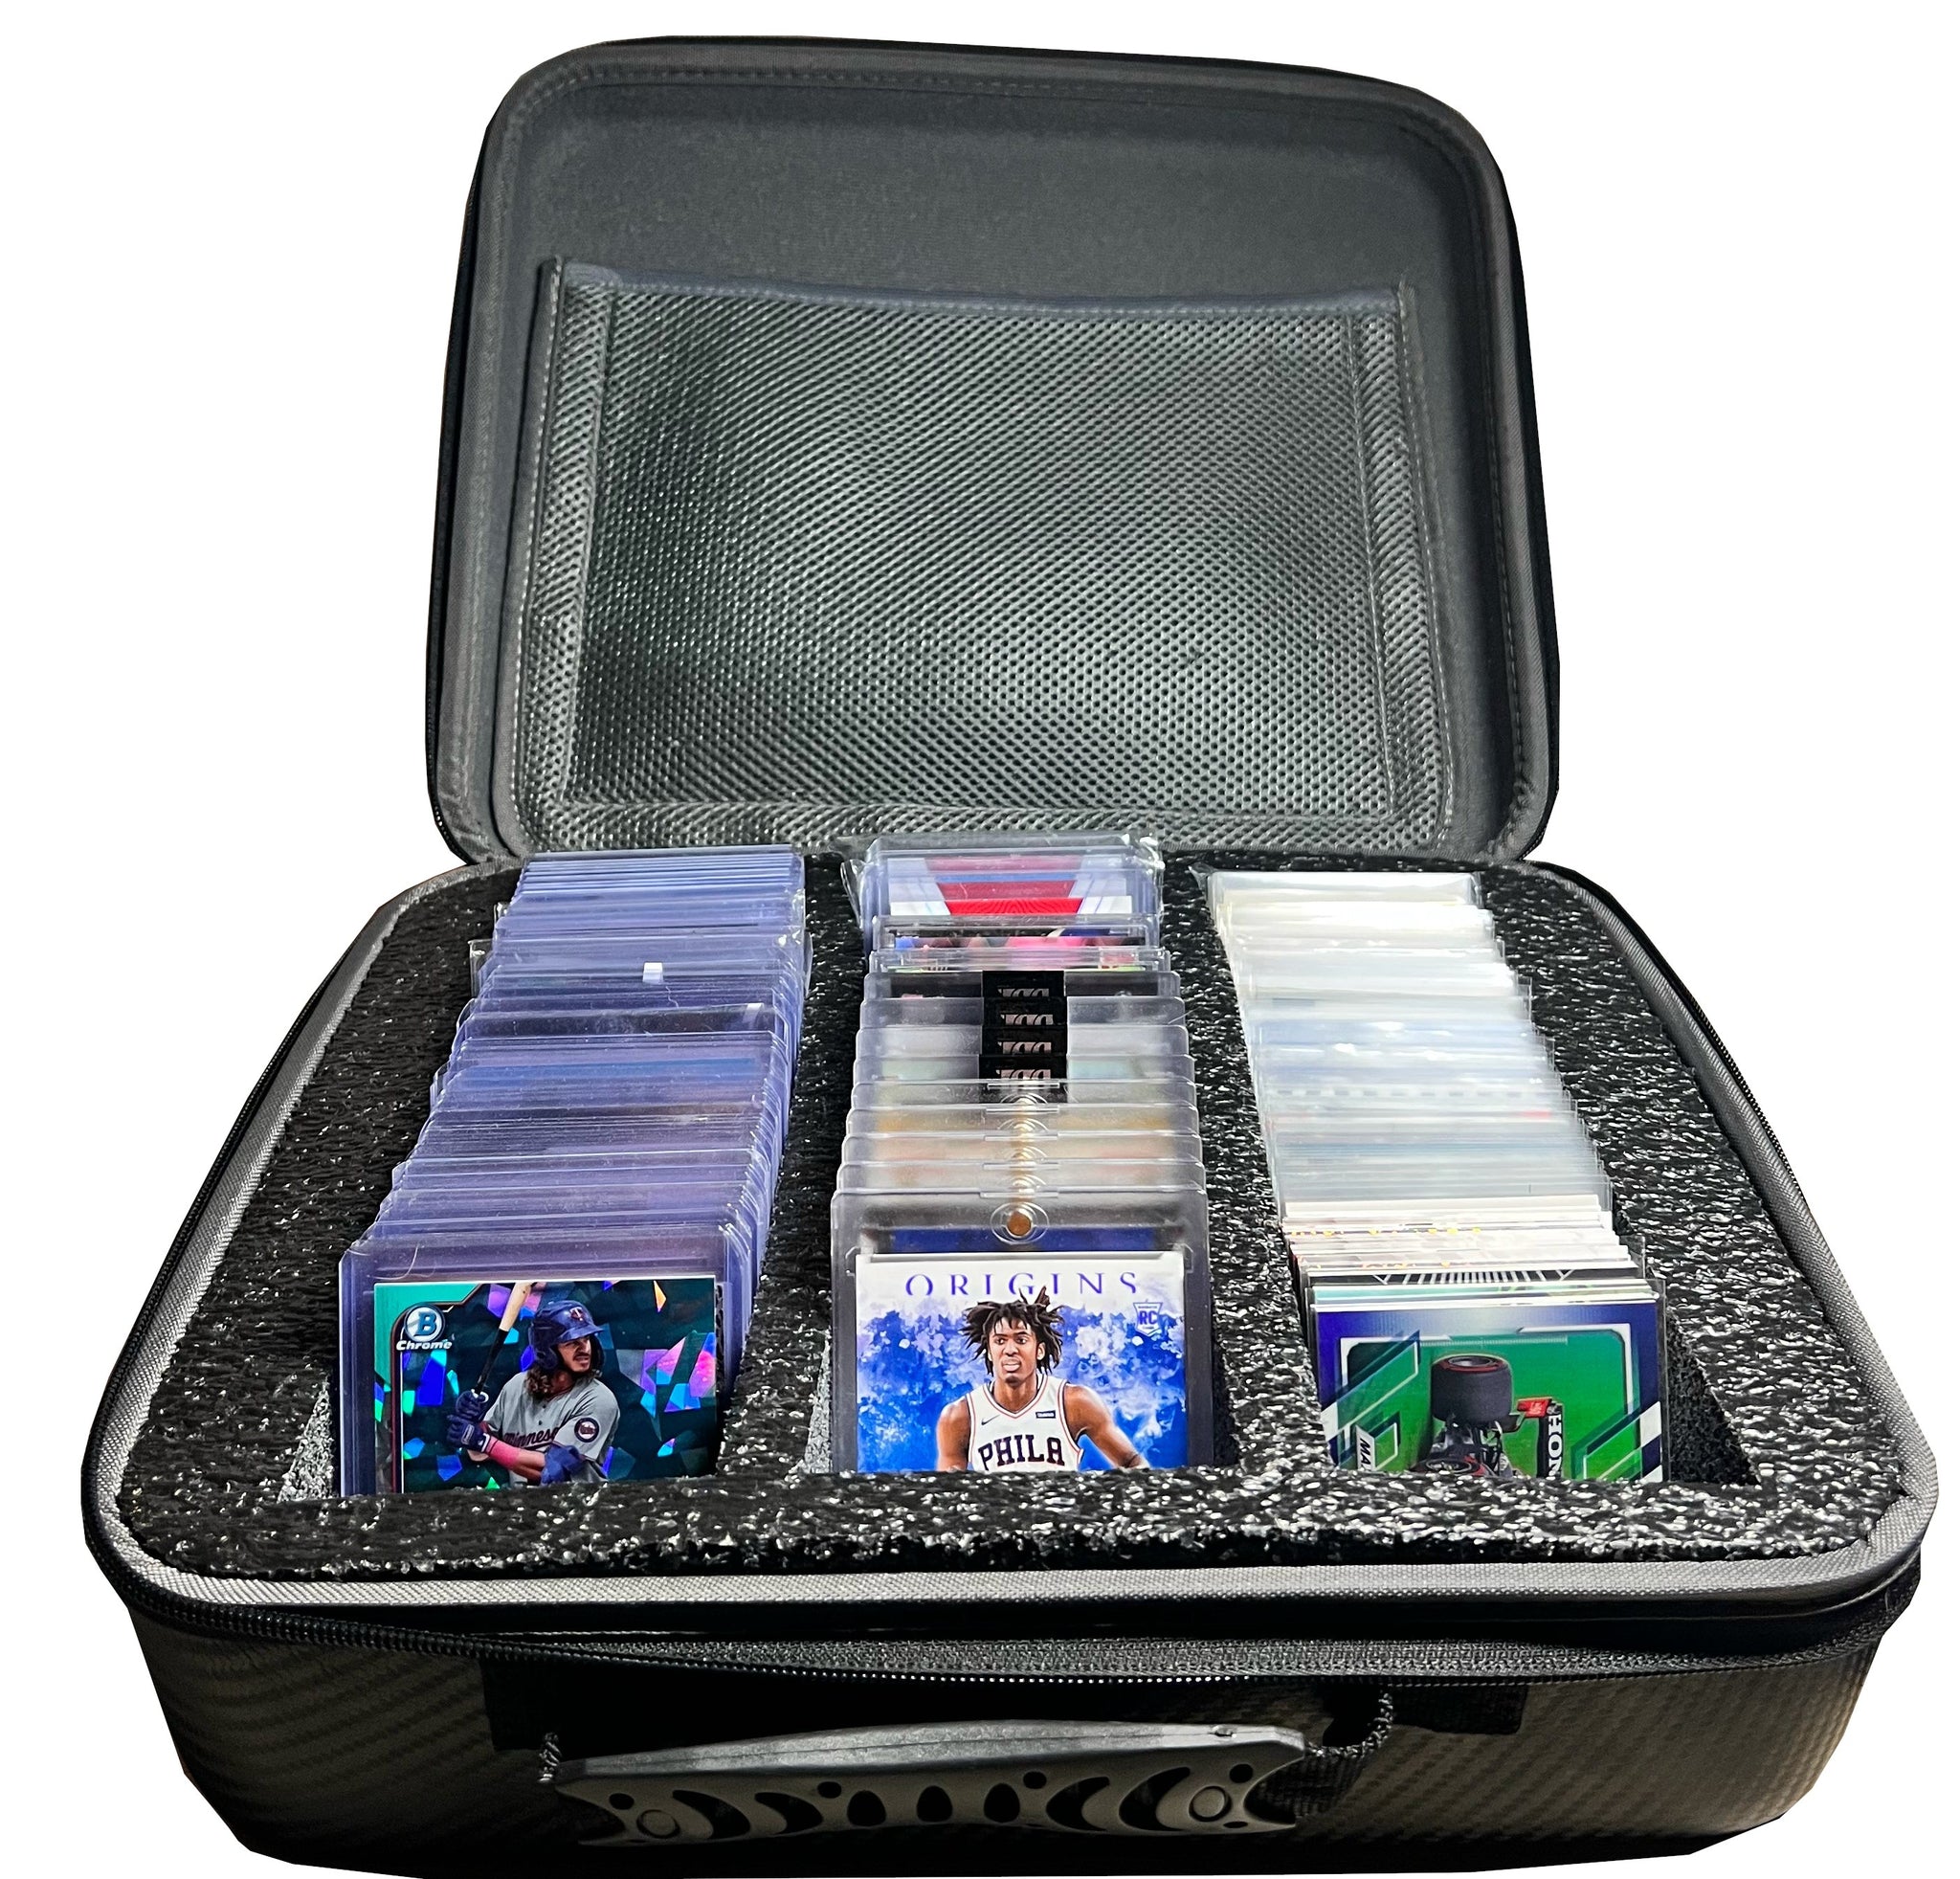 Top Lite Case for Toploaders, One-Touch, Magnetics, Card Savers, and More